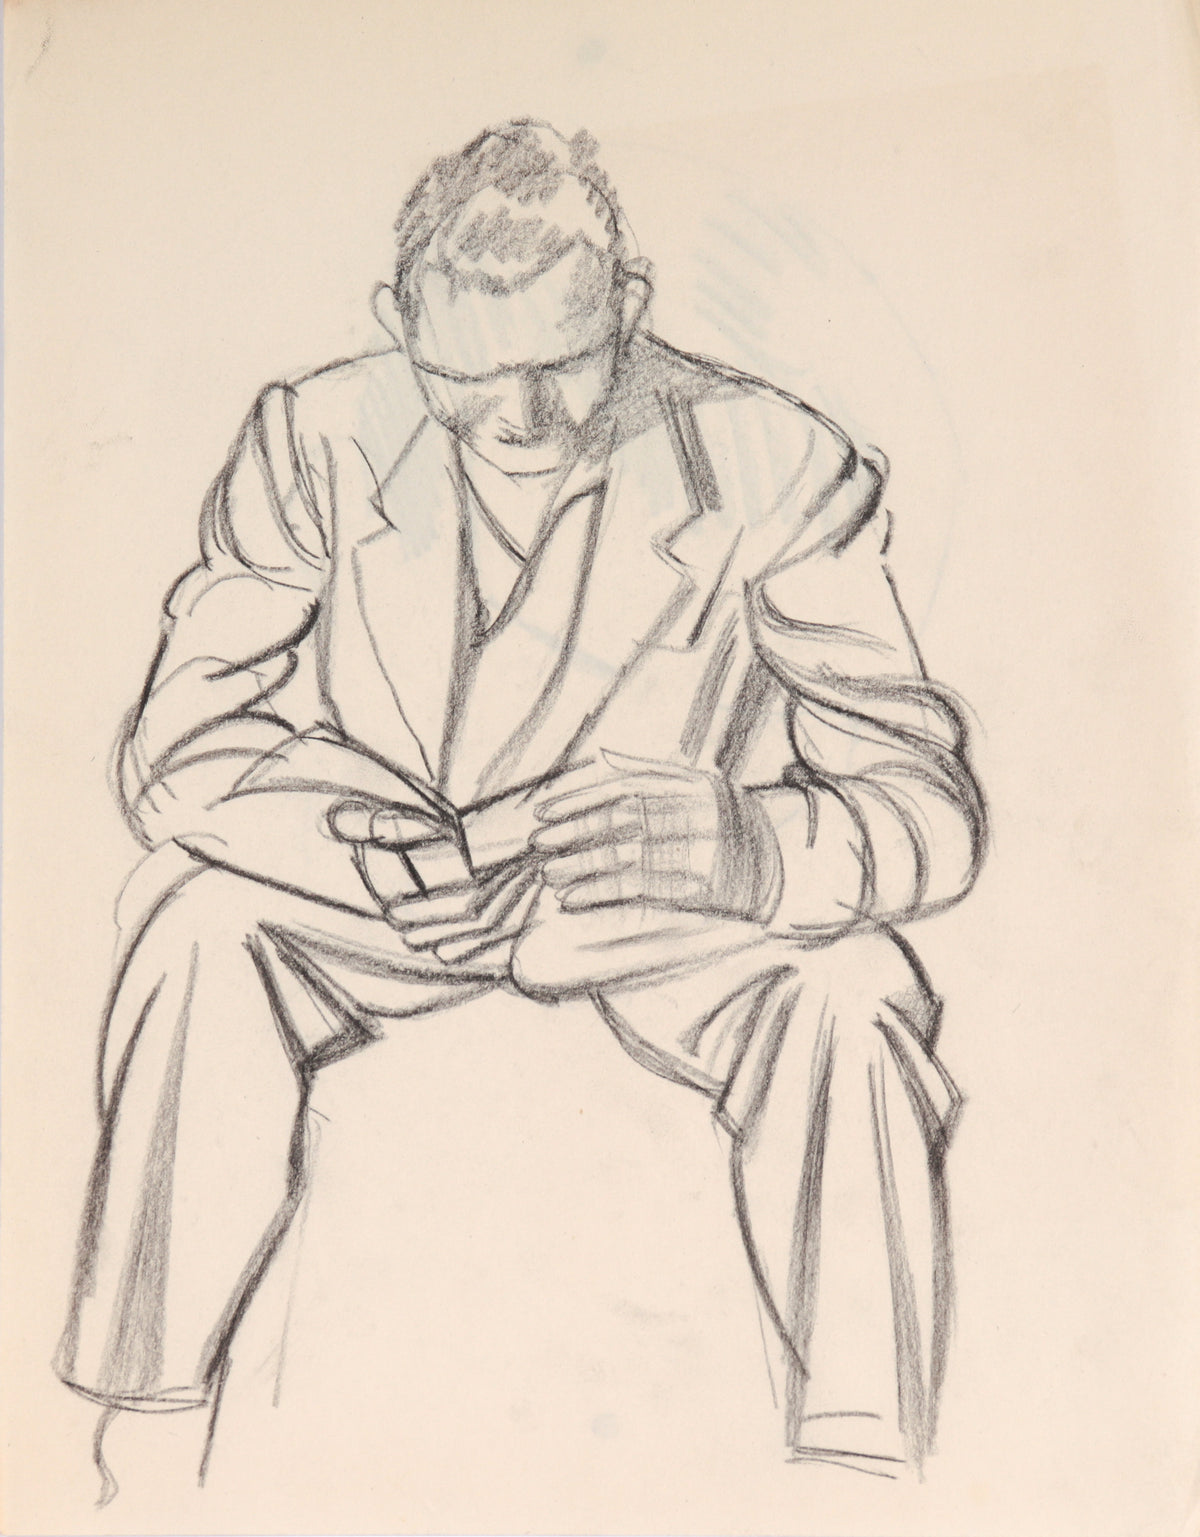 Seated Reading Figure&lt;br&gt;Mid 20th Century Graphite&lt;br&gt;&lt;br&gt;#C3958